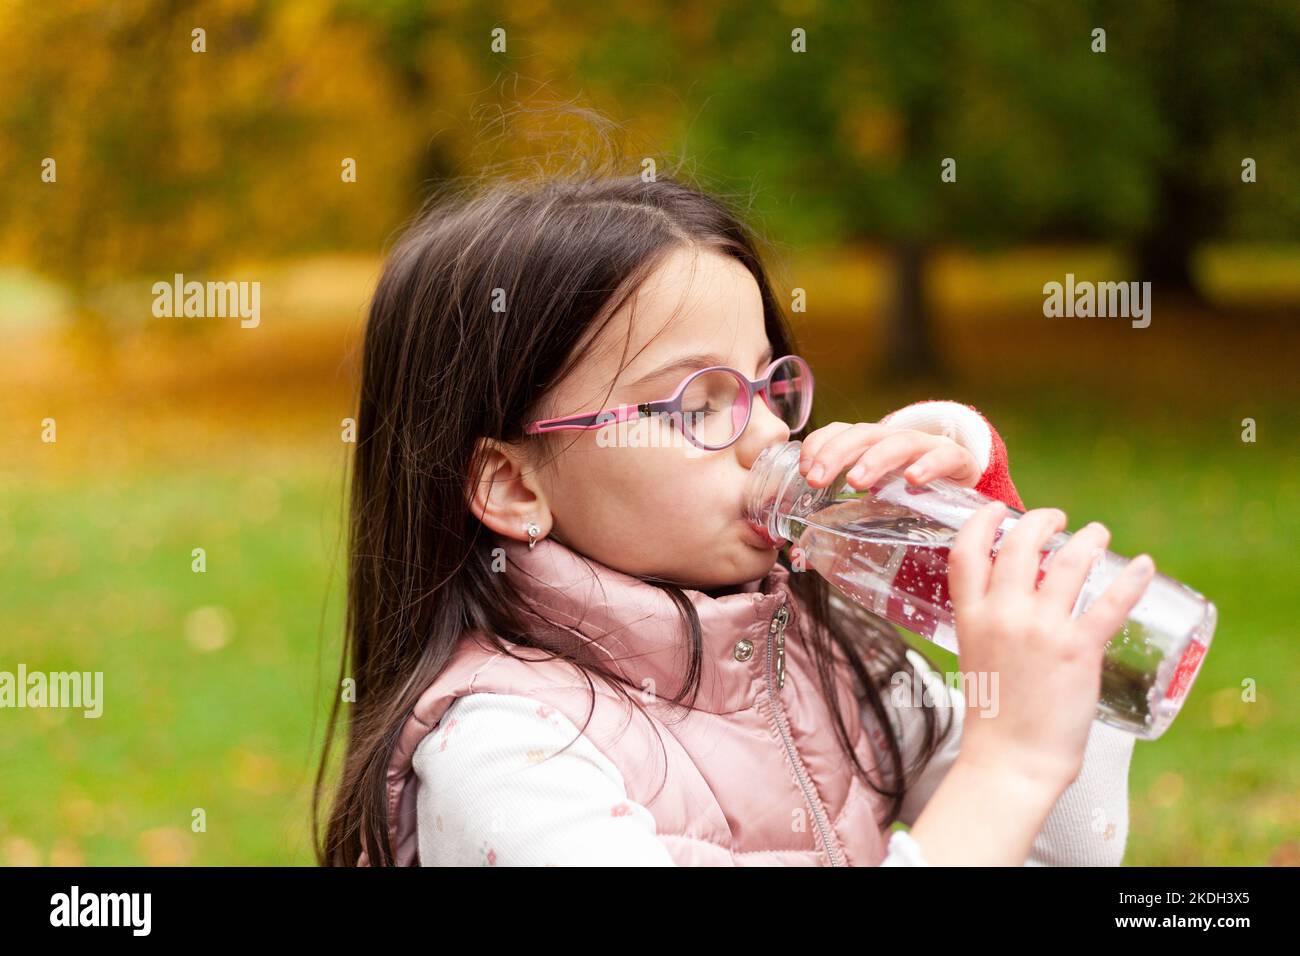 Cute girl with long hair and glasses drinks water from a plastic bottle on a blurred autumn park background Stock Photo